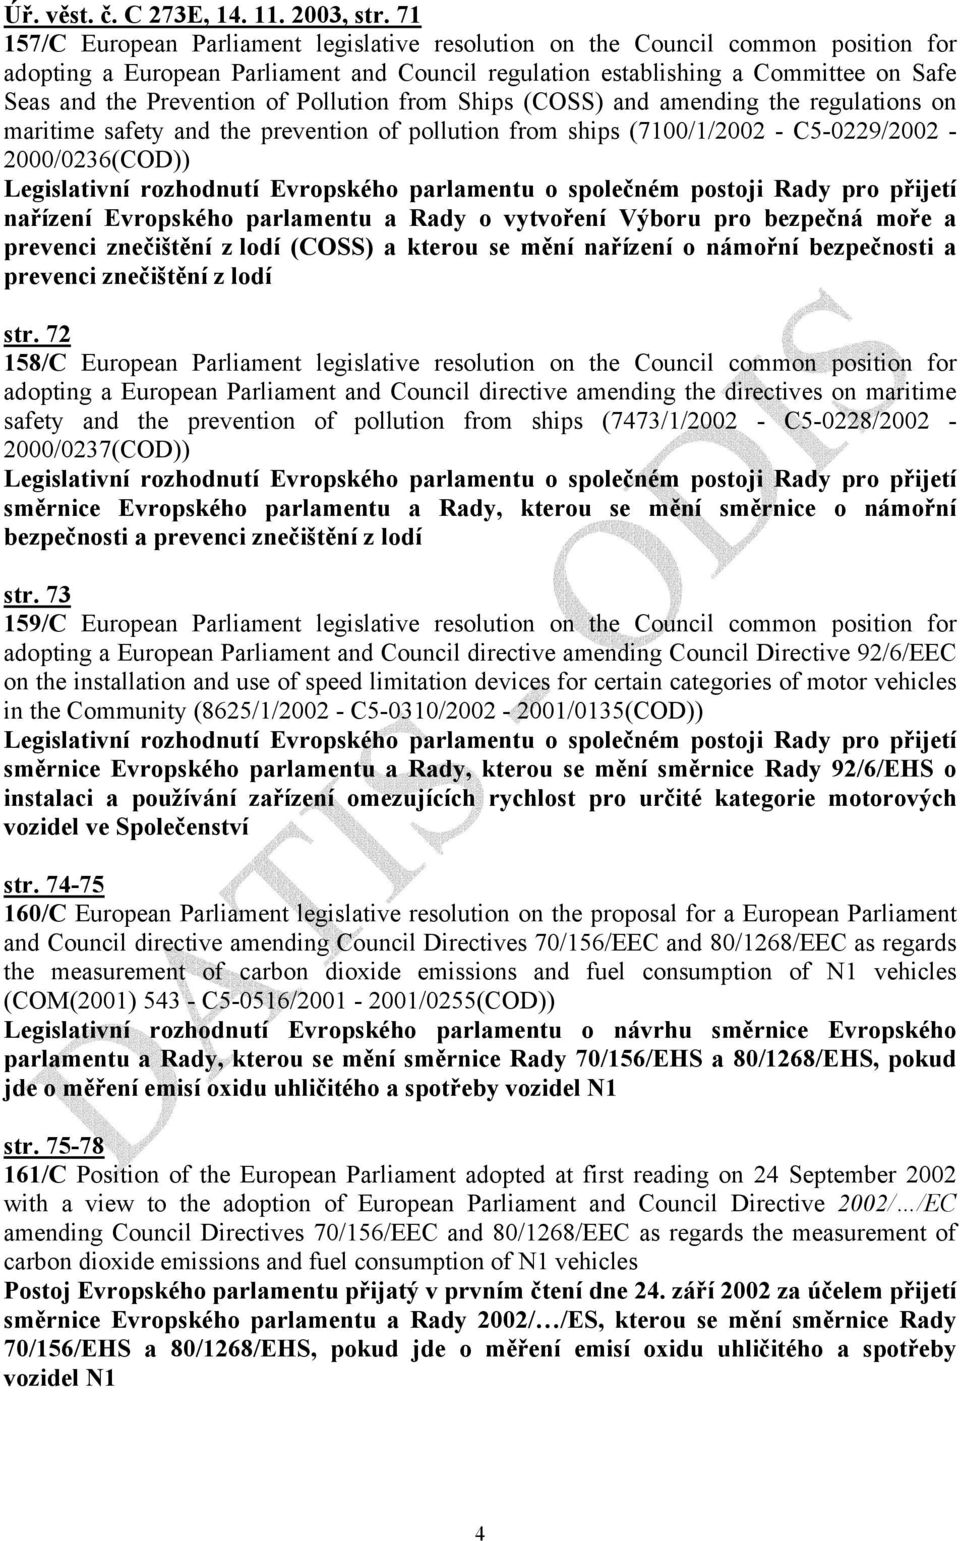 of Pollution from Ships (COSS) and amending the regulations on maritime safety and the prevention of pollution from ships (7100/1/2002 - C5-0229/2002-2000/0236(COD)) nařízení Evropského parlamentu a